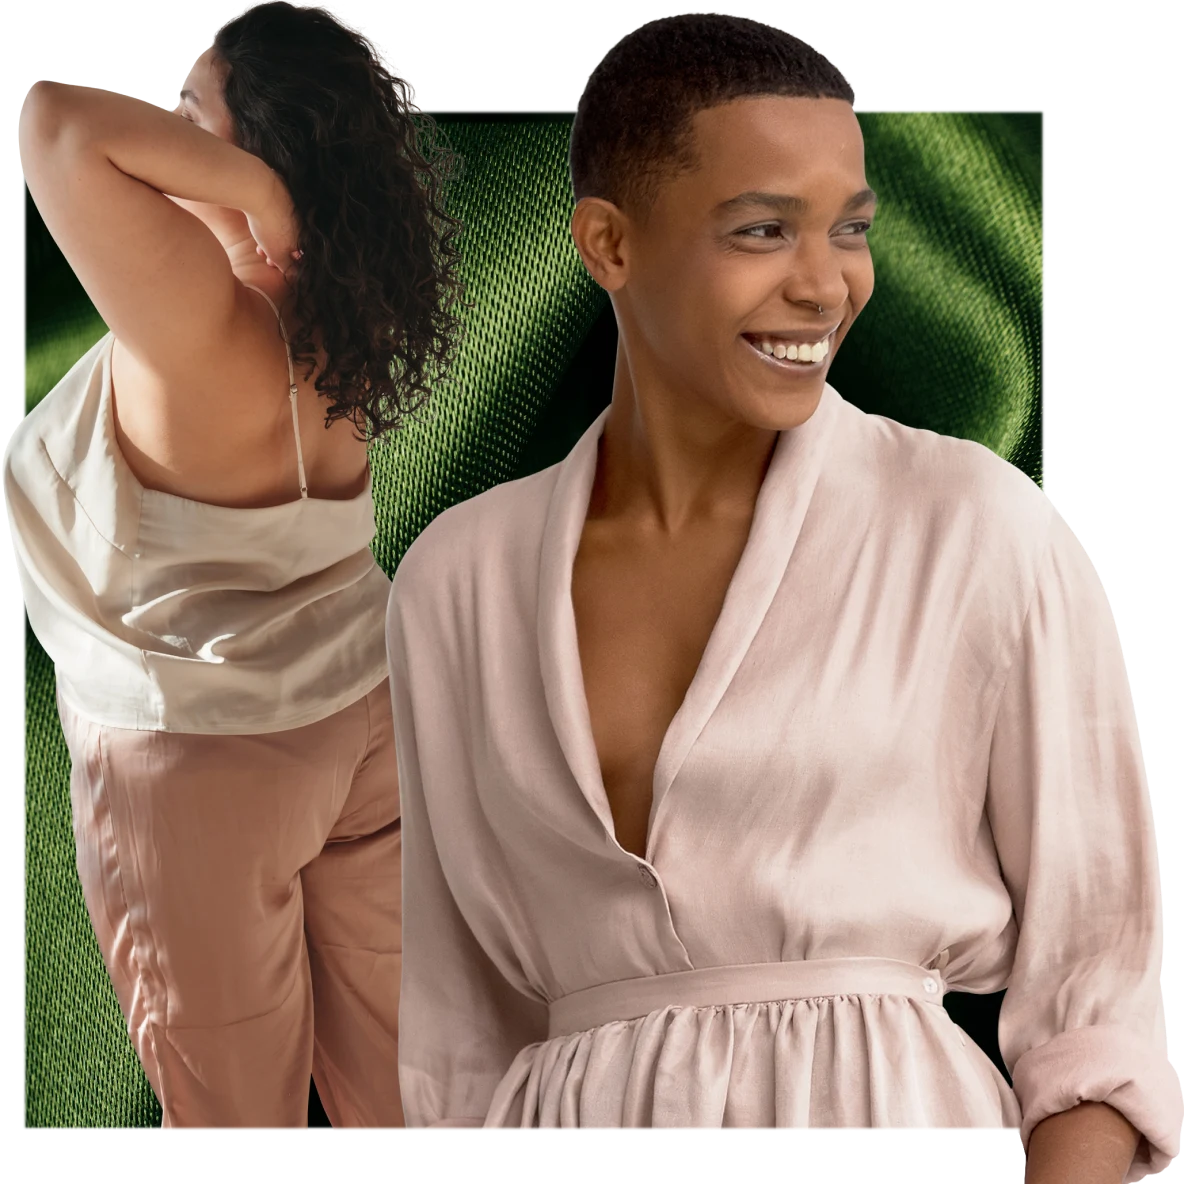 Two Black women, one with short hair and one with long hair, in pink night clothes, against a green linen backdrop.